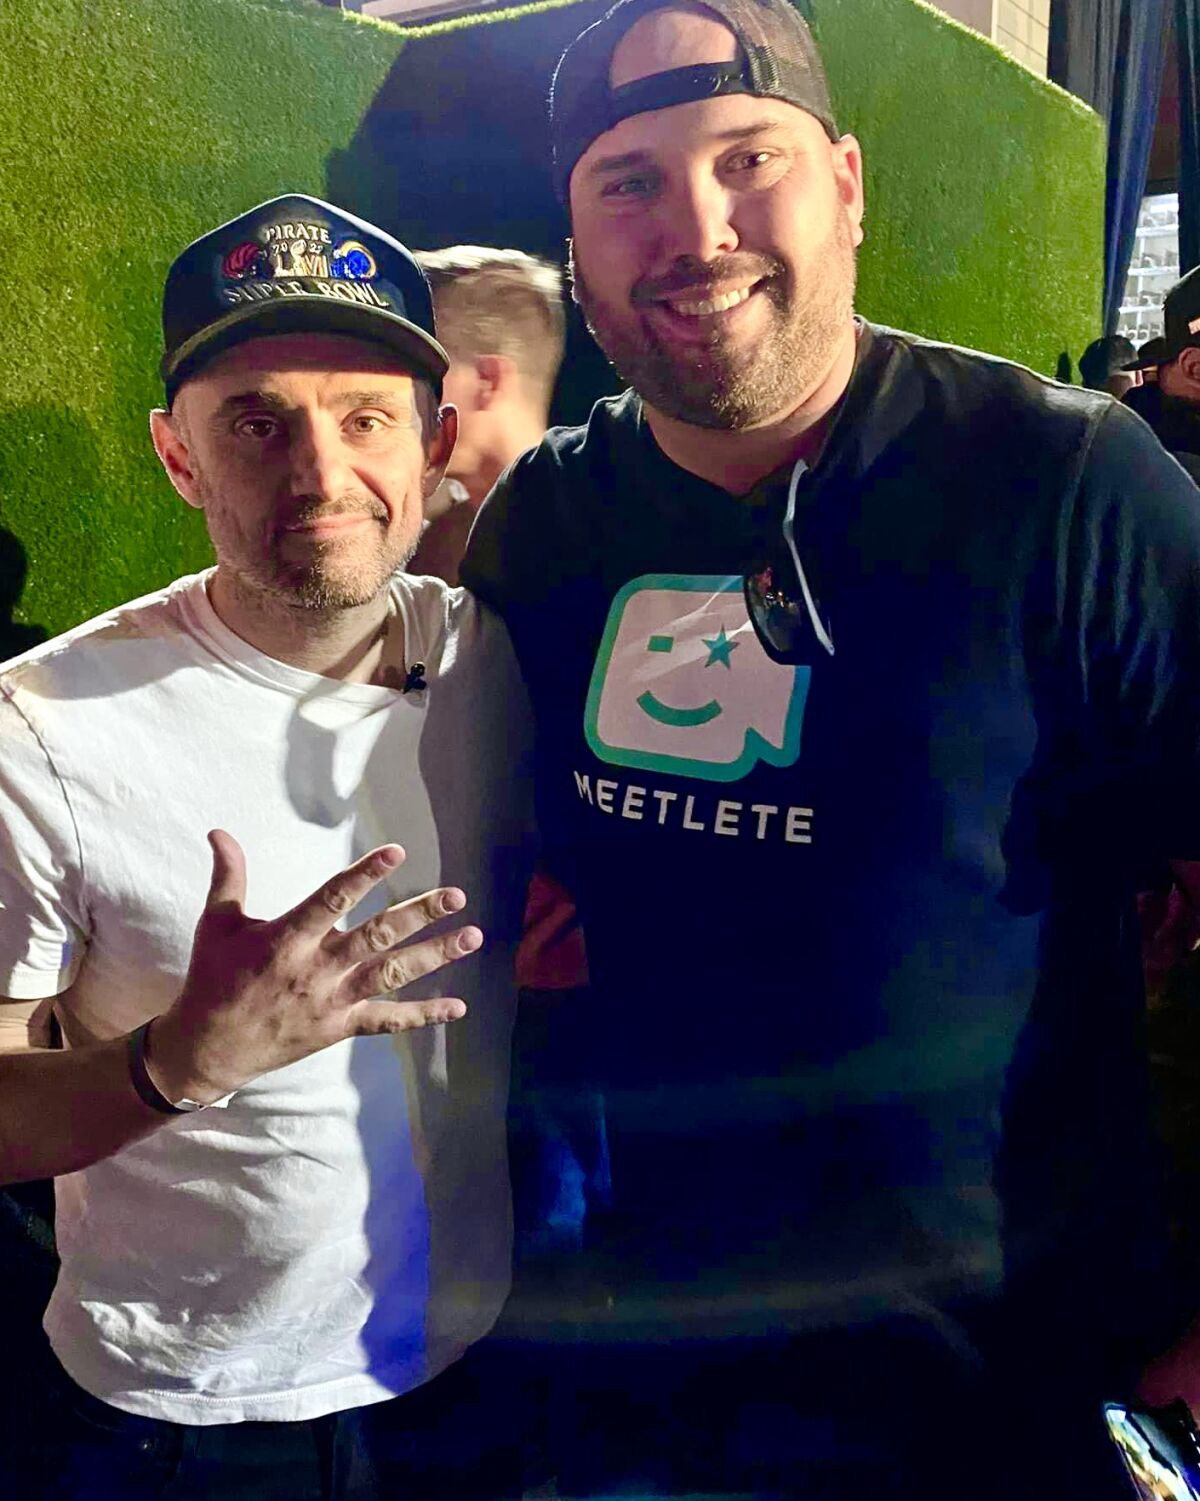 Meetlete co-founder Rob Connolly with entrpreneur Gary Vaynerchuk during a Super Bowl party hosted by Snoop Dogg.